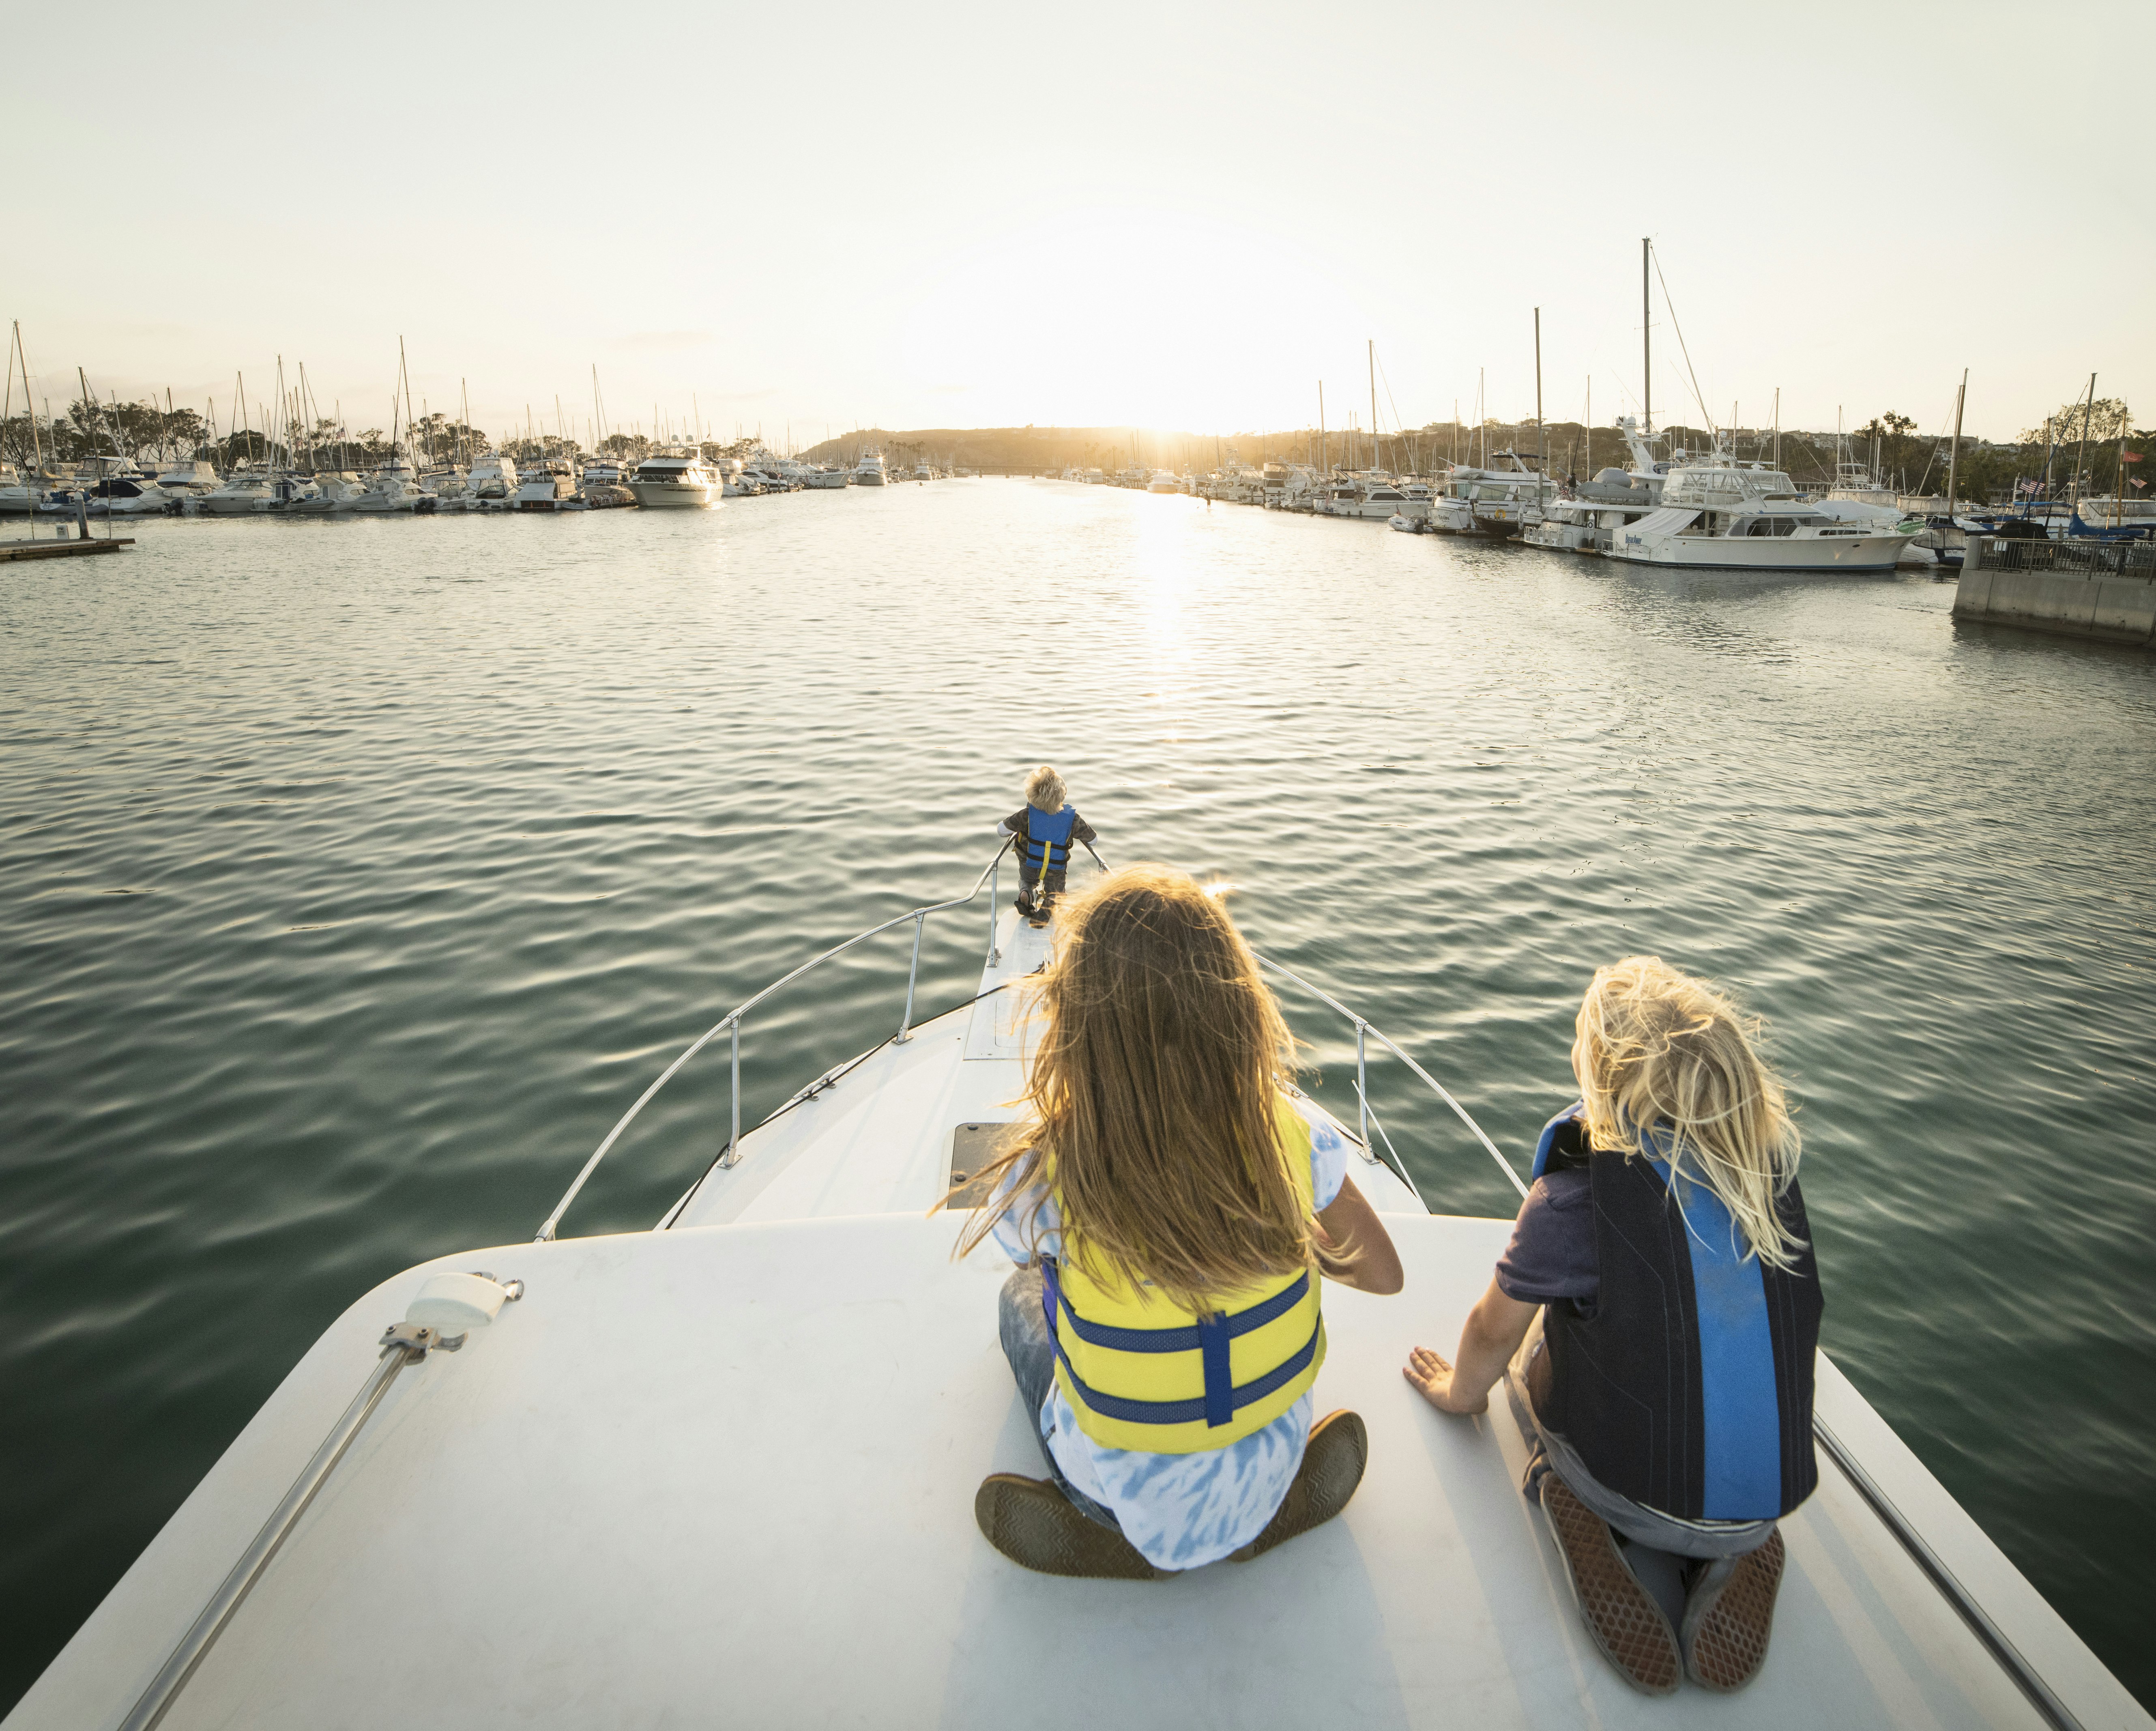 Three kids sit on the front of a boat as it cruises through the harbor